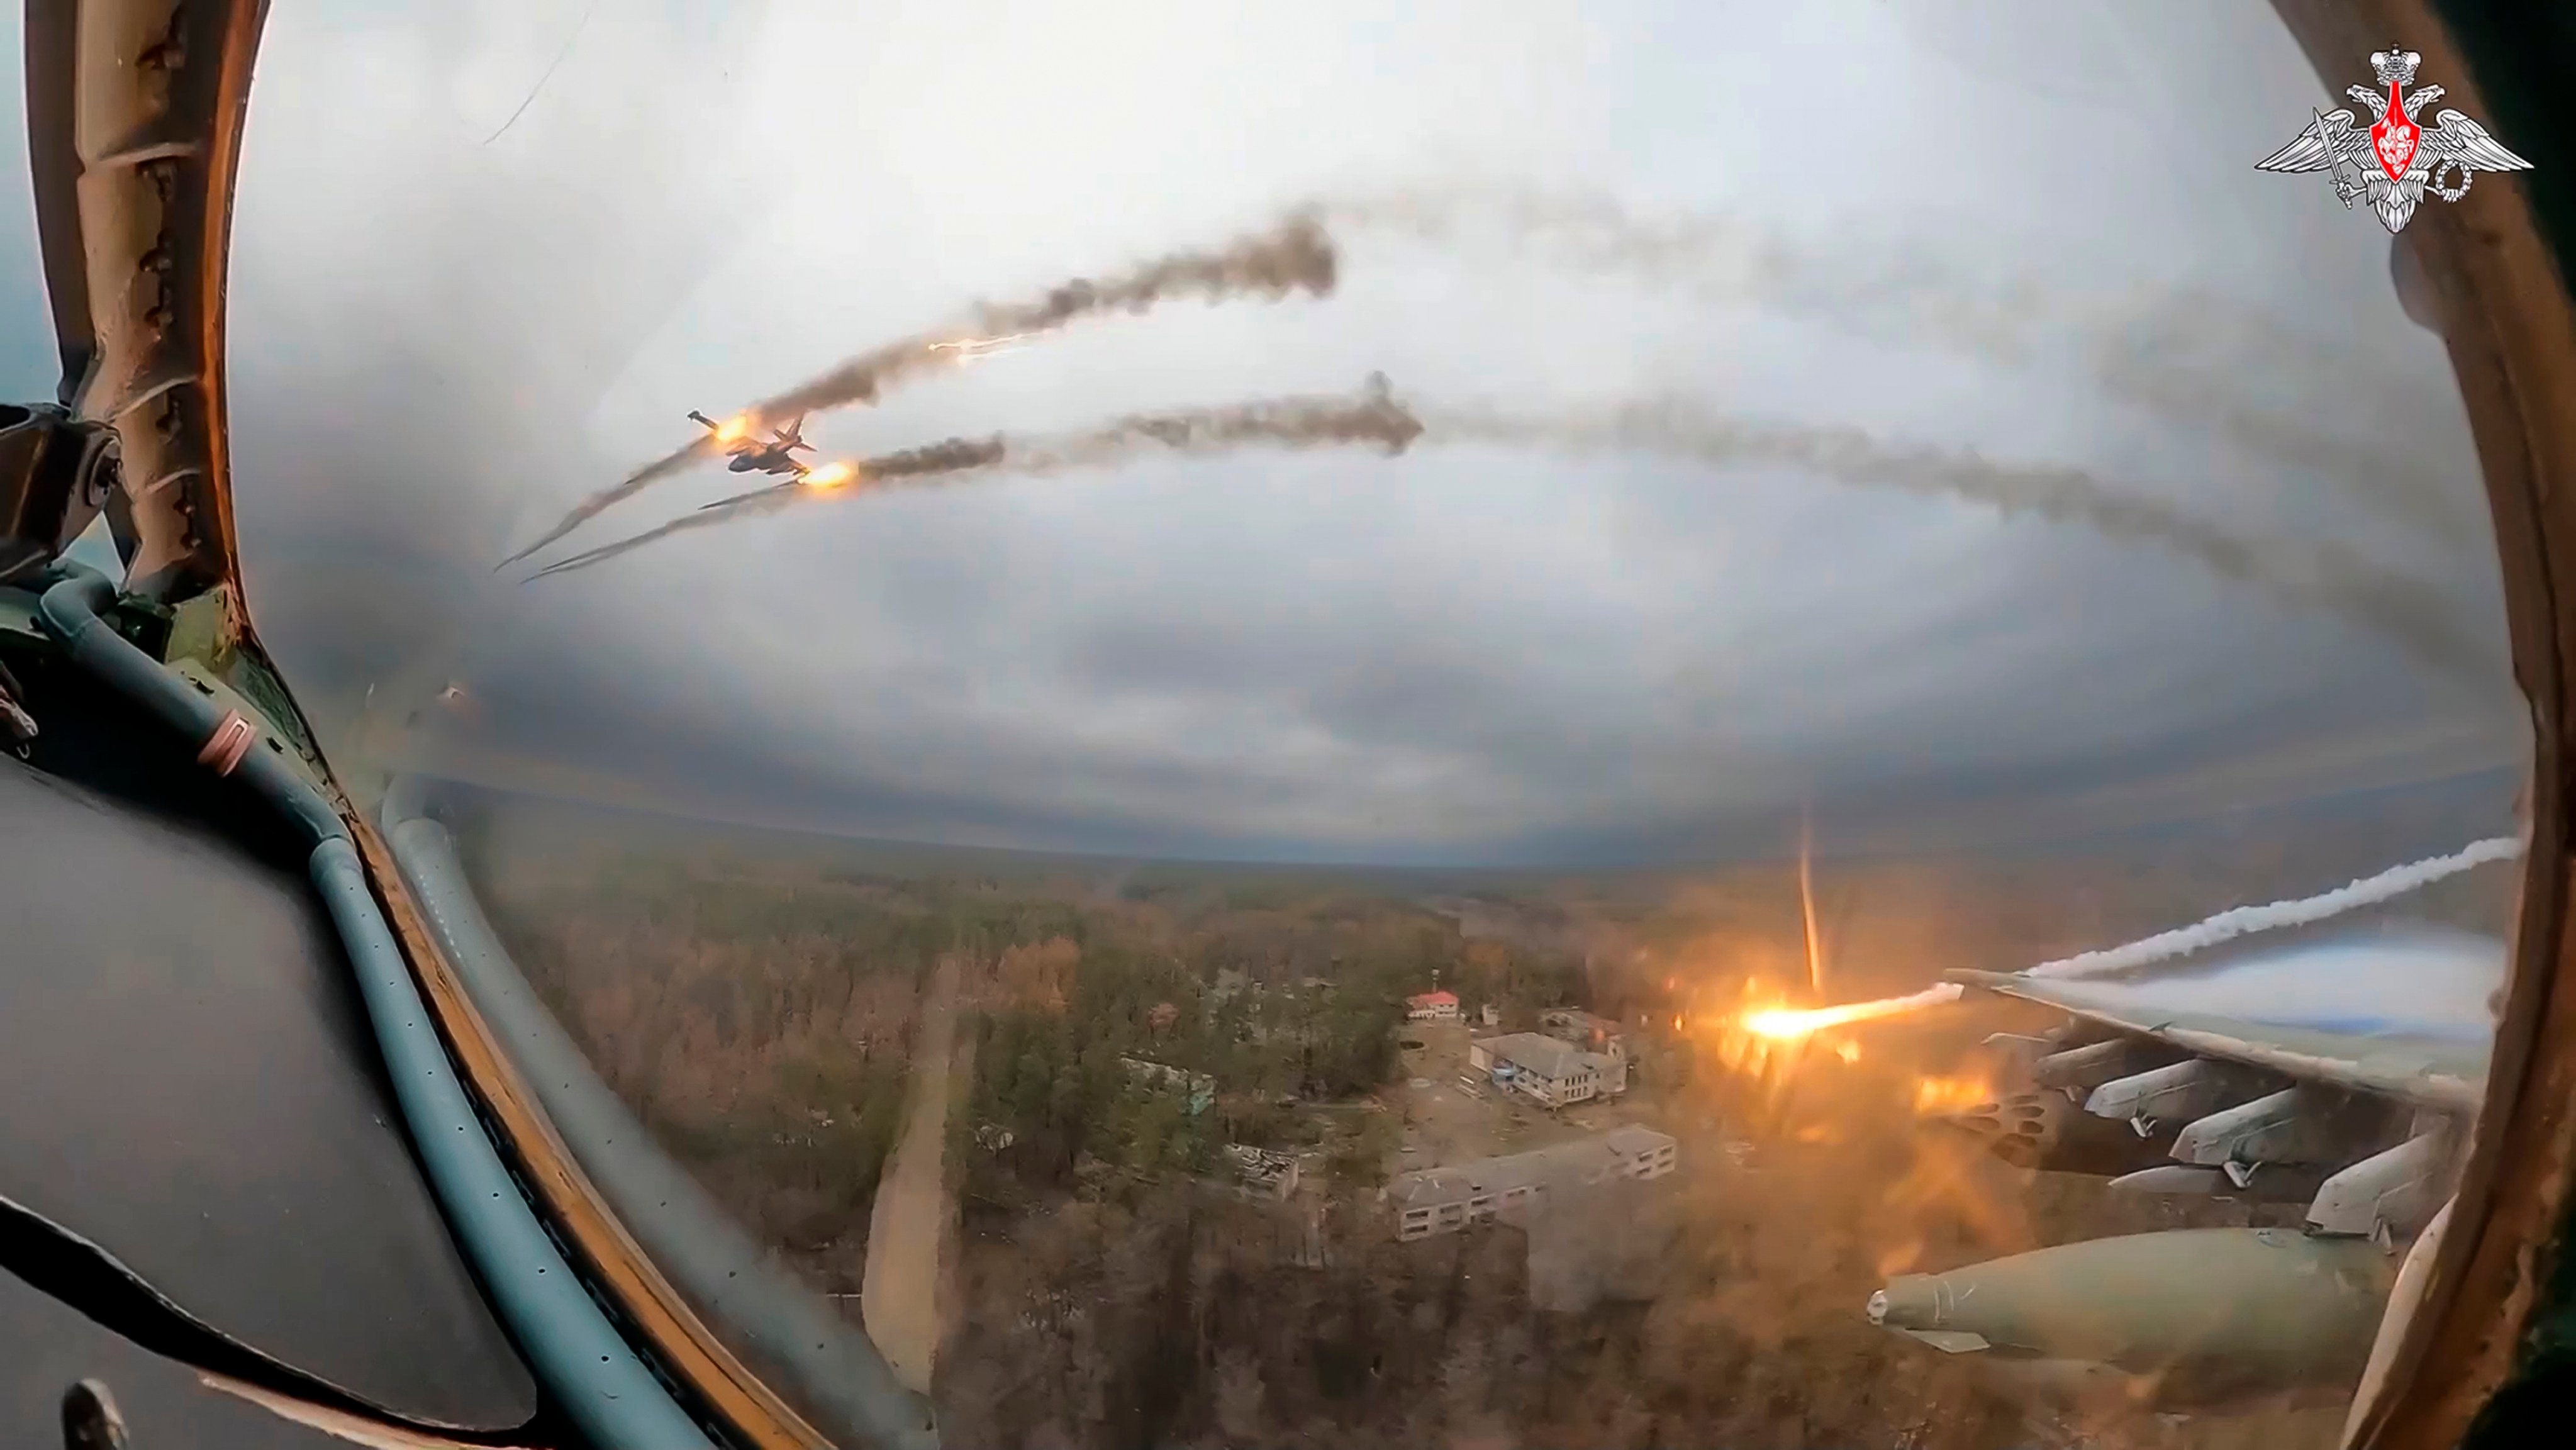 Footage released in January shows Russian Su-25 warplanes firing rockets on a mission over Ukraine. Photo: Russian Defense Ministry via AP